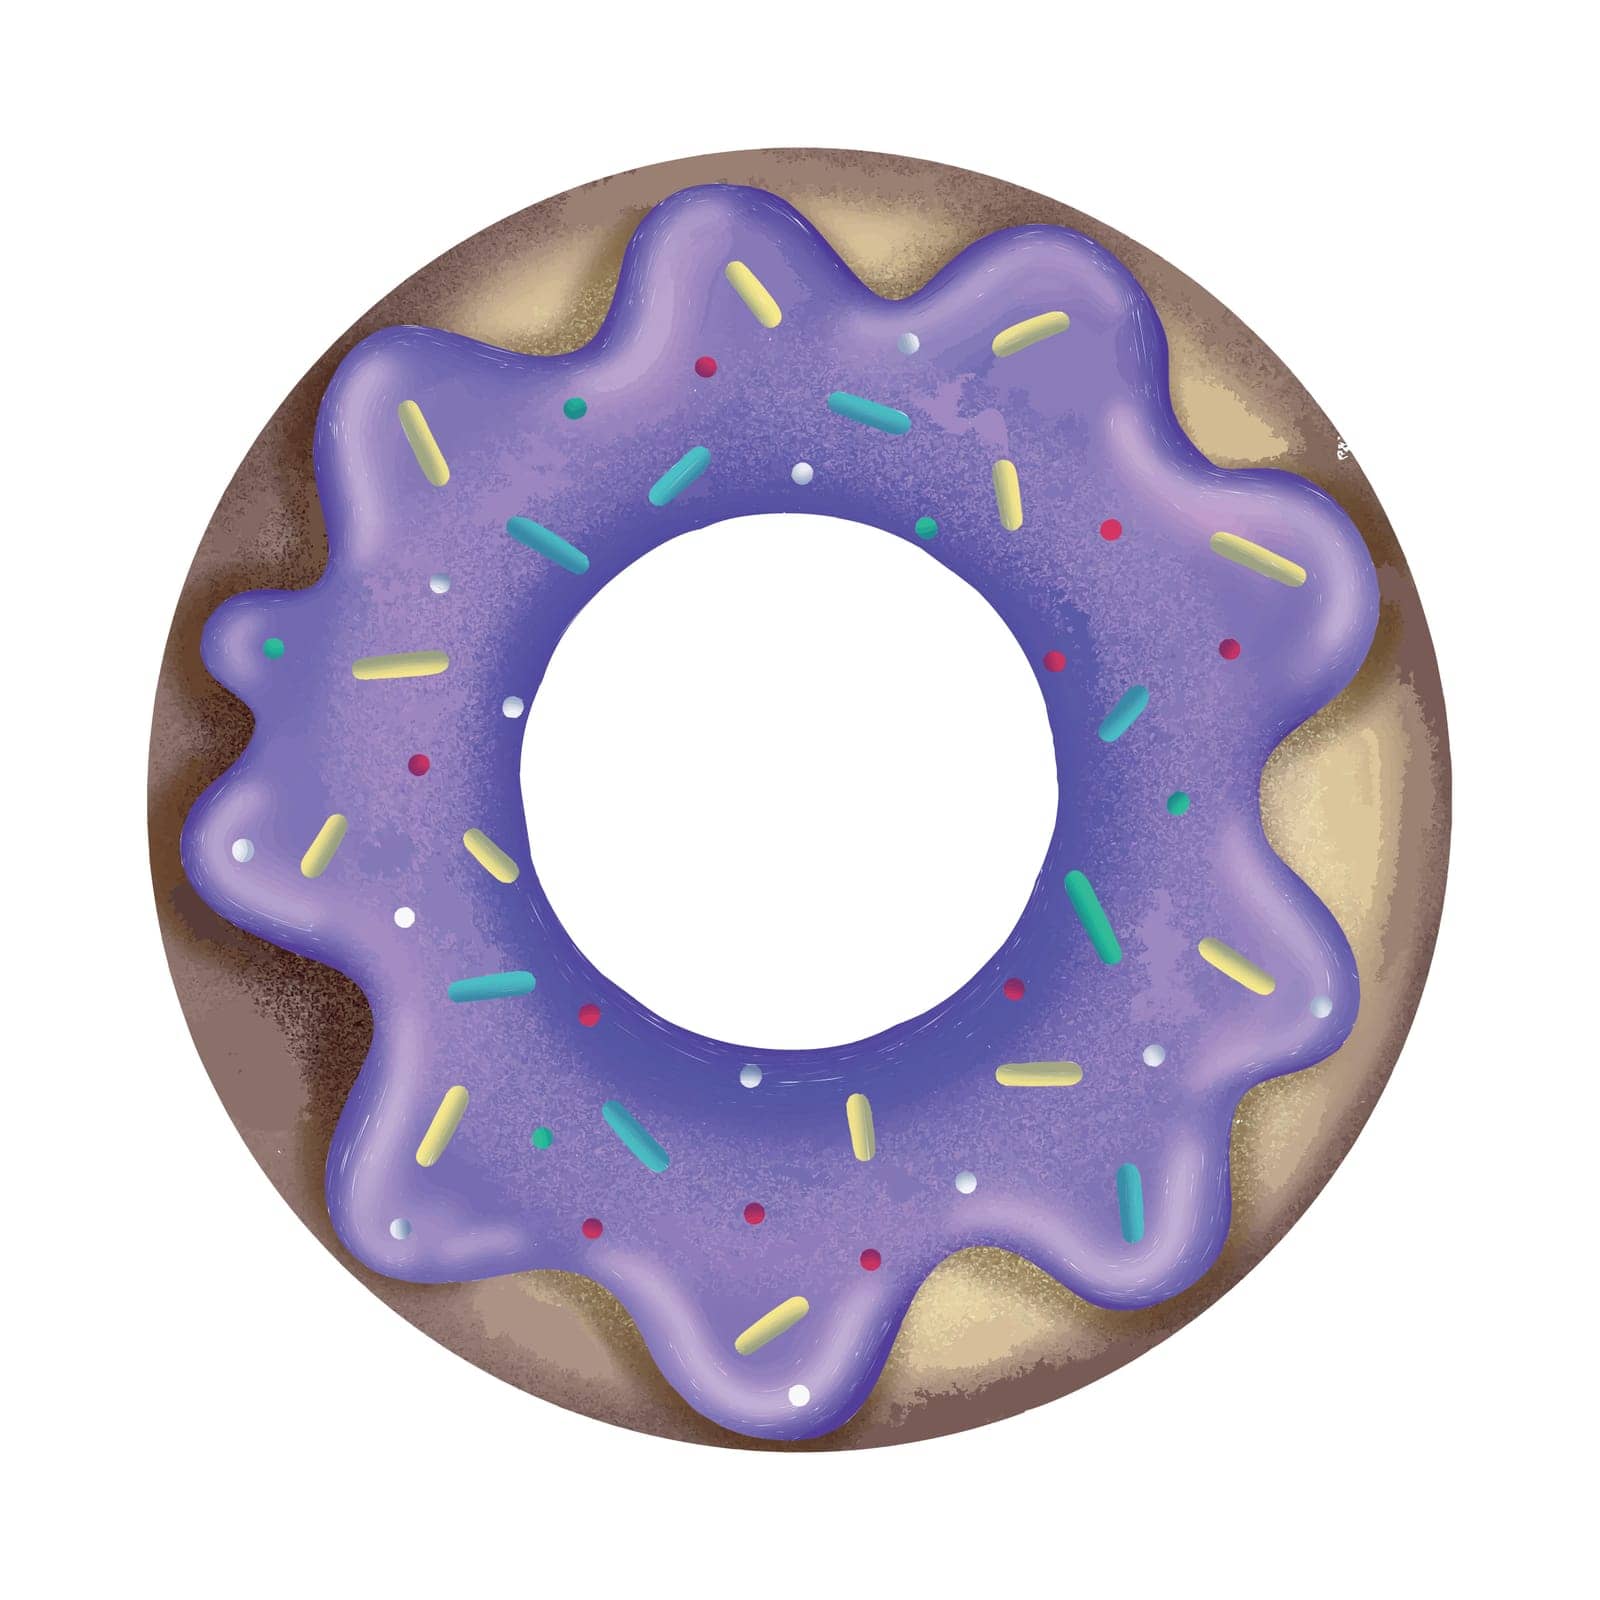 illustration of cartoon tasty doughnut with purple icing and colorful sprinkles isolated on white background. Vector illustration